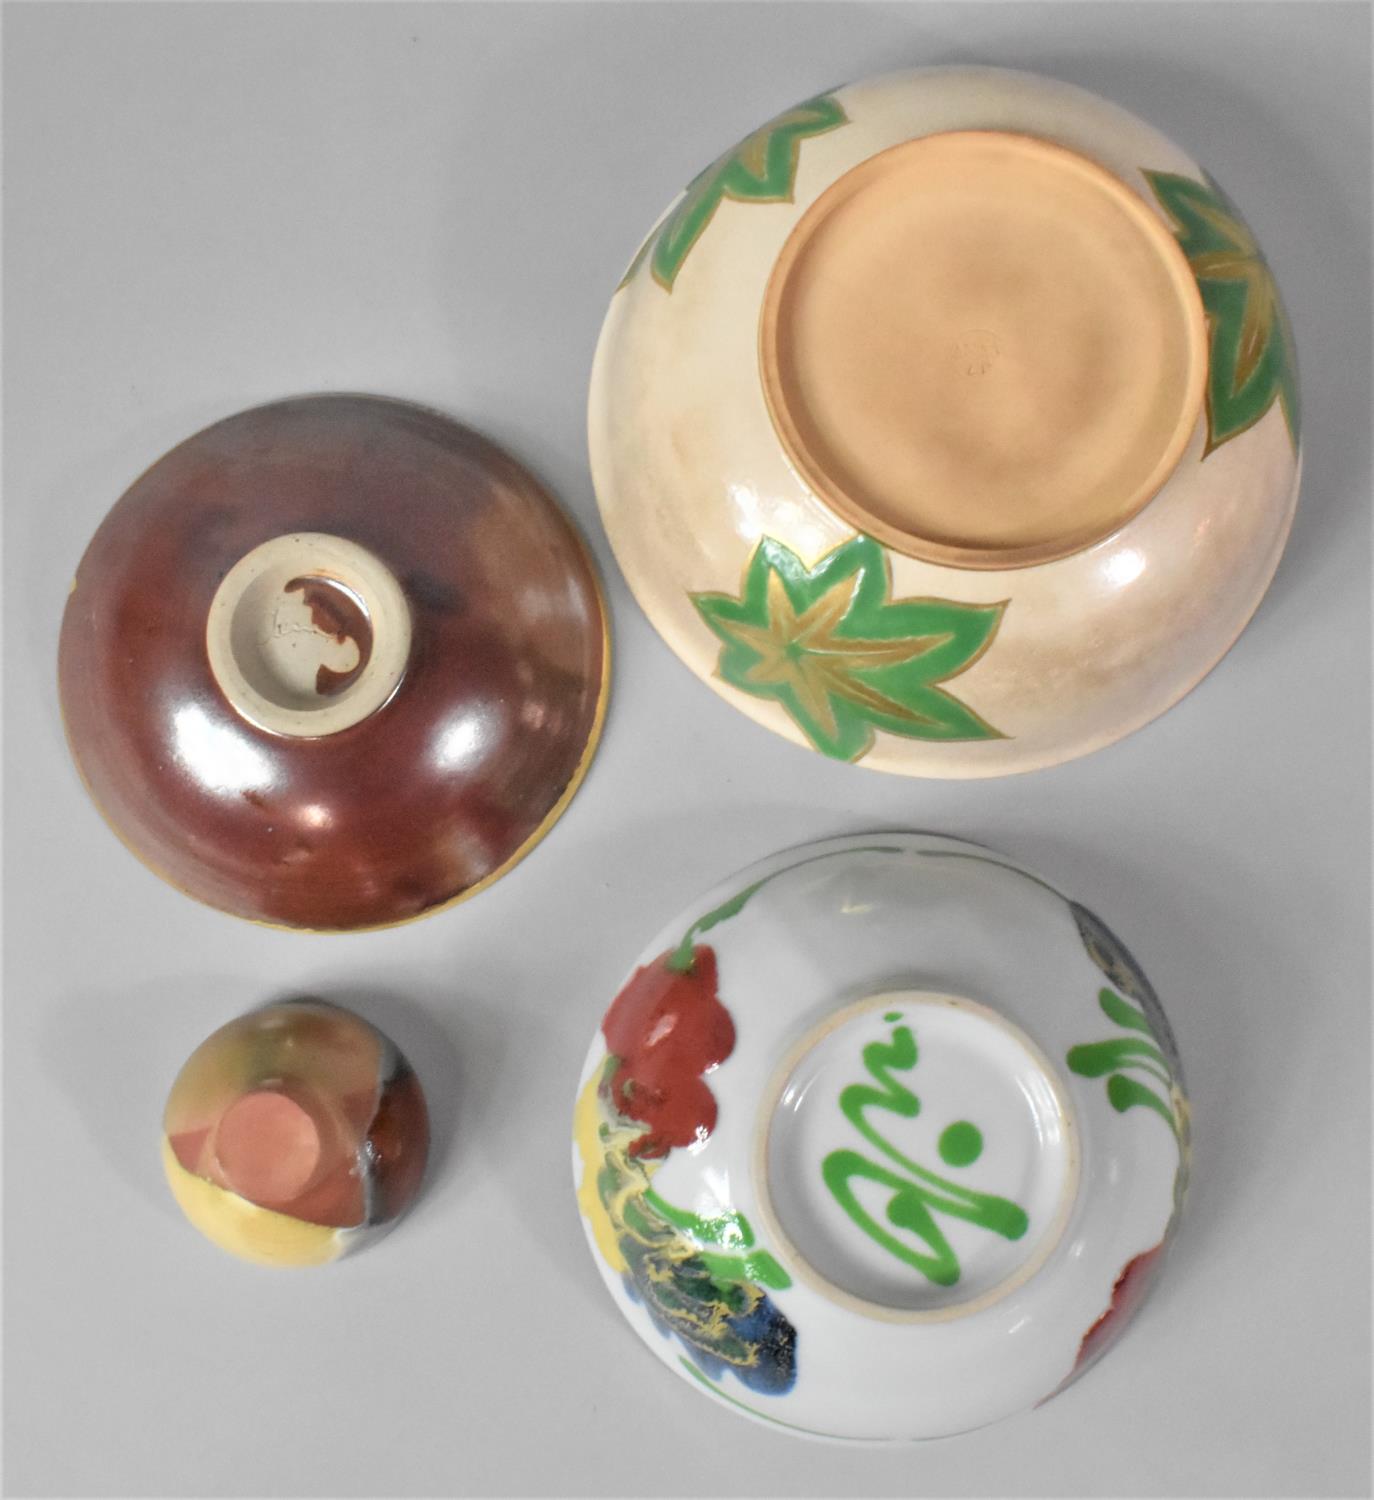 A Collection of Glazed Studio Pottery Stoneware and Terracotta Bowls, Some Signed - Image 2 of 2